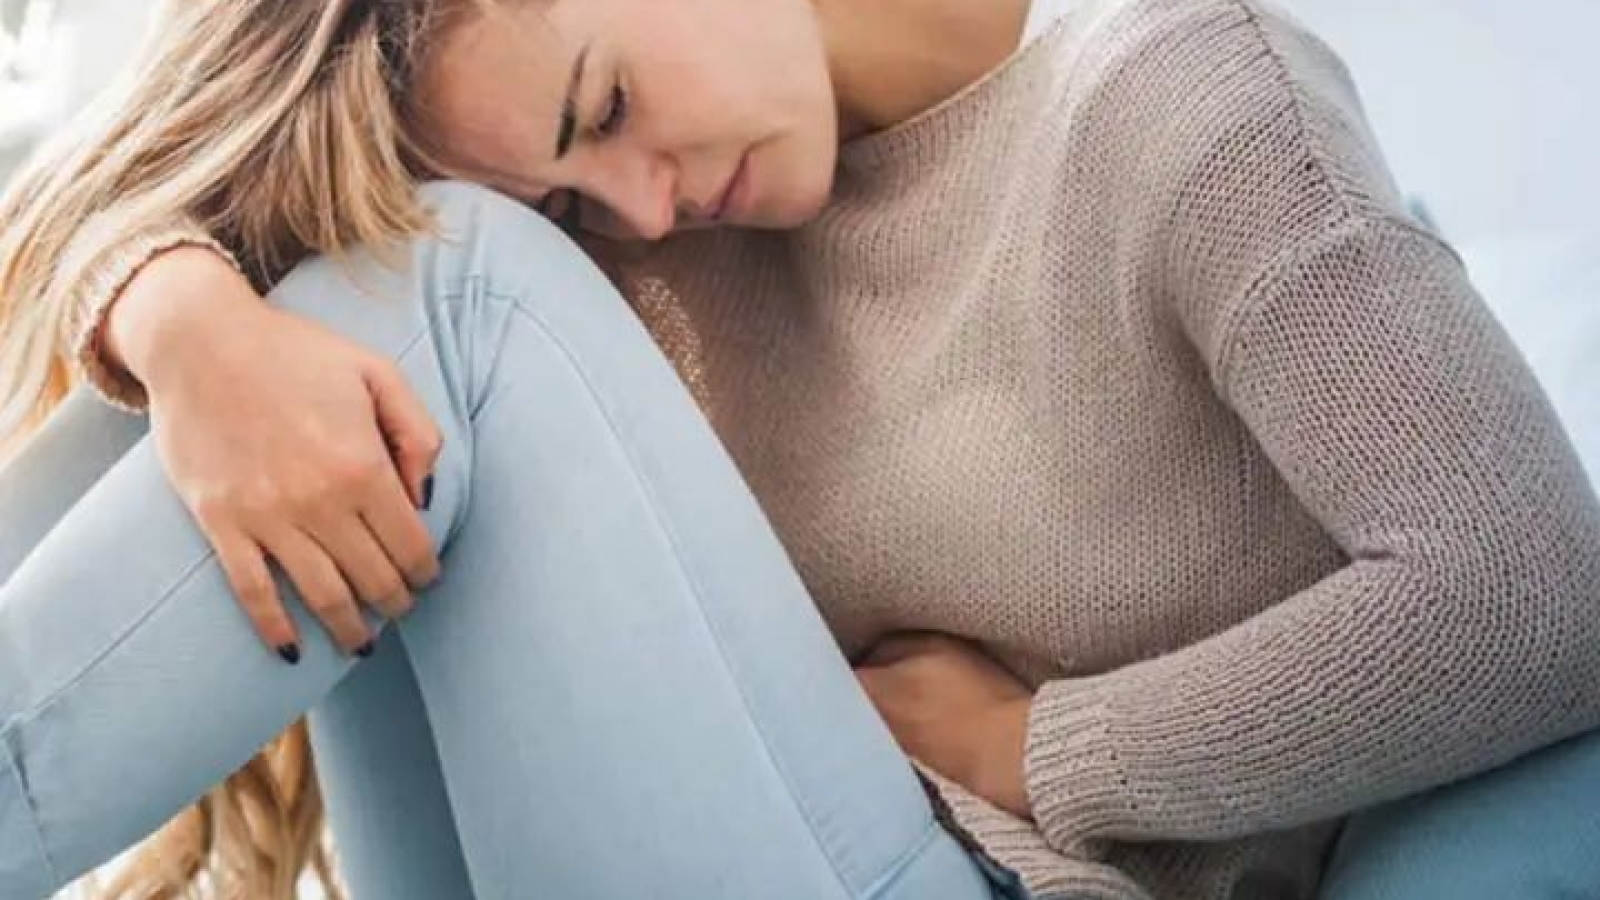 menstrual disorders problems and its solution